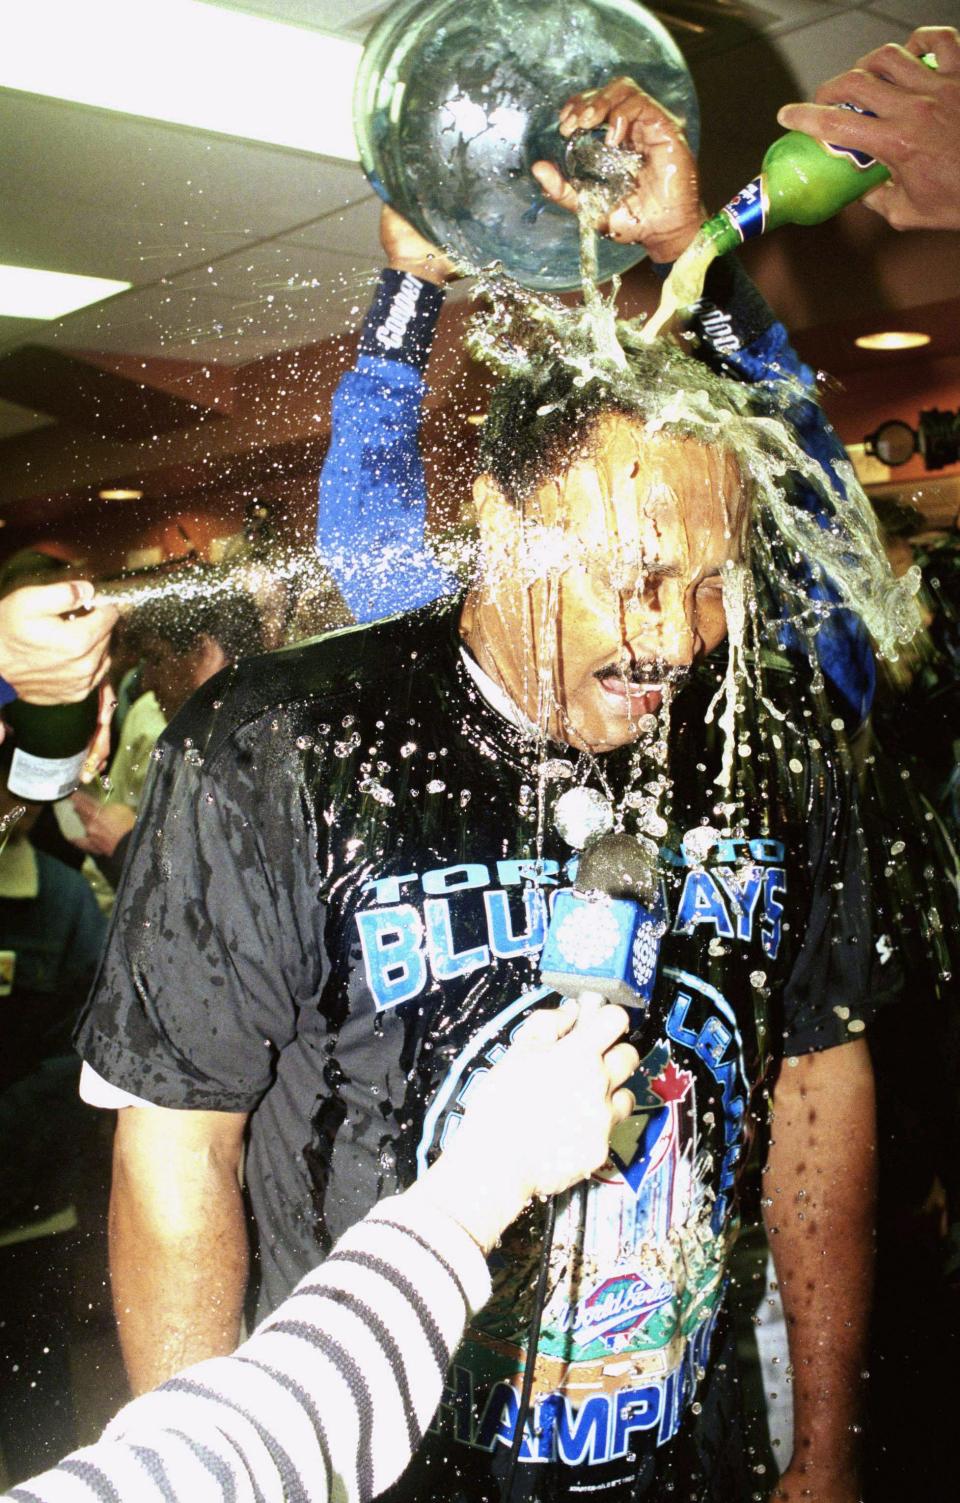 Toronto Blue Jays manager Cito Gaston gets doused in the locker room as his players celebrate their 6-3 win over the Chicago White Sox on Tuesday, Oct. 12, 1993 in Chicago, giving them the American League Championship, 4 games to 2.